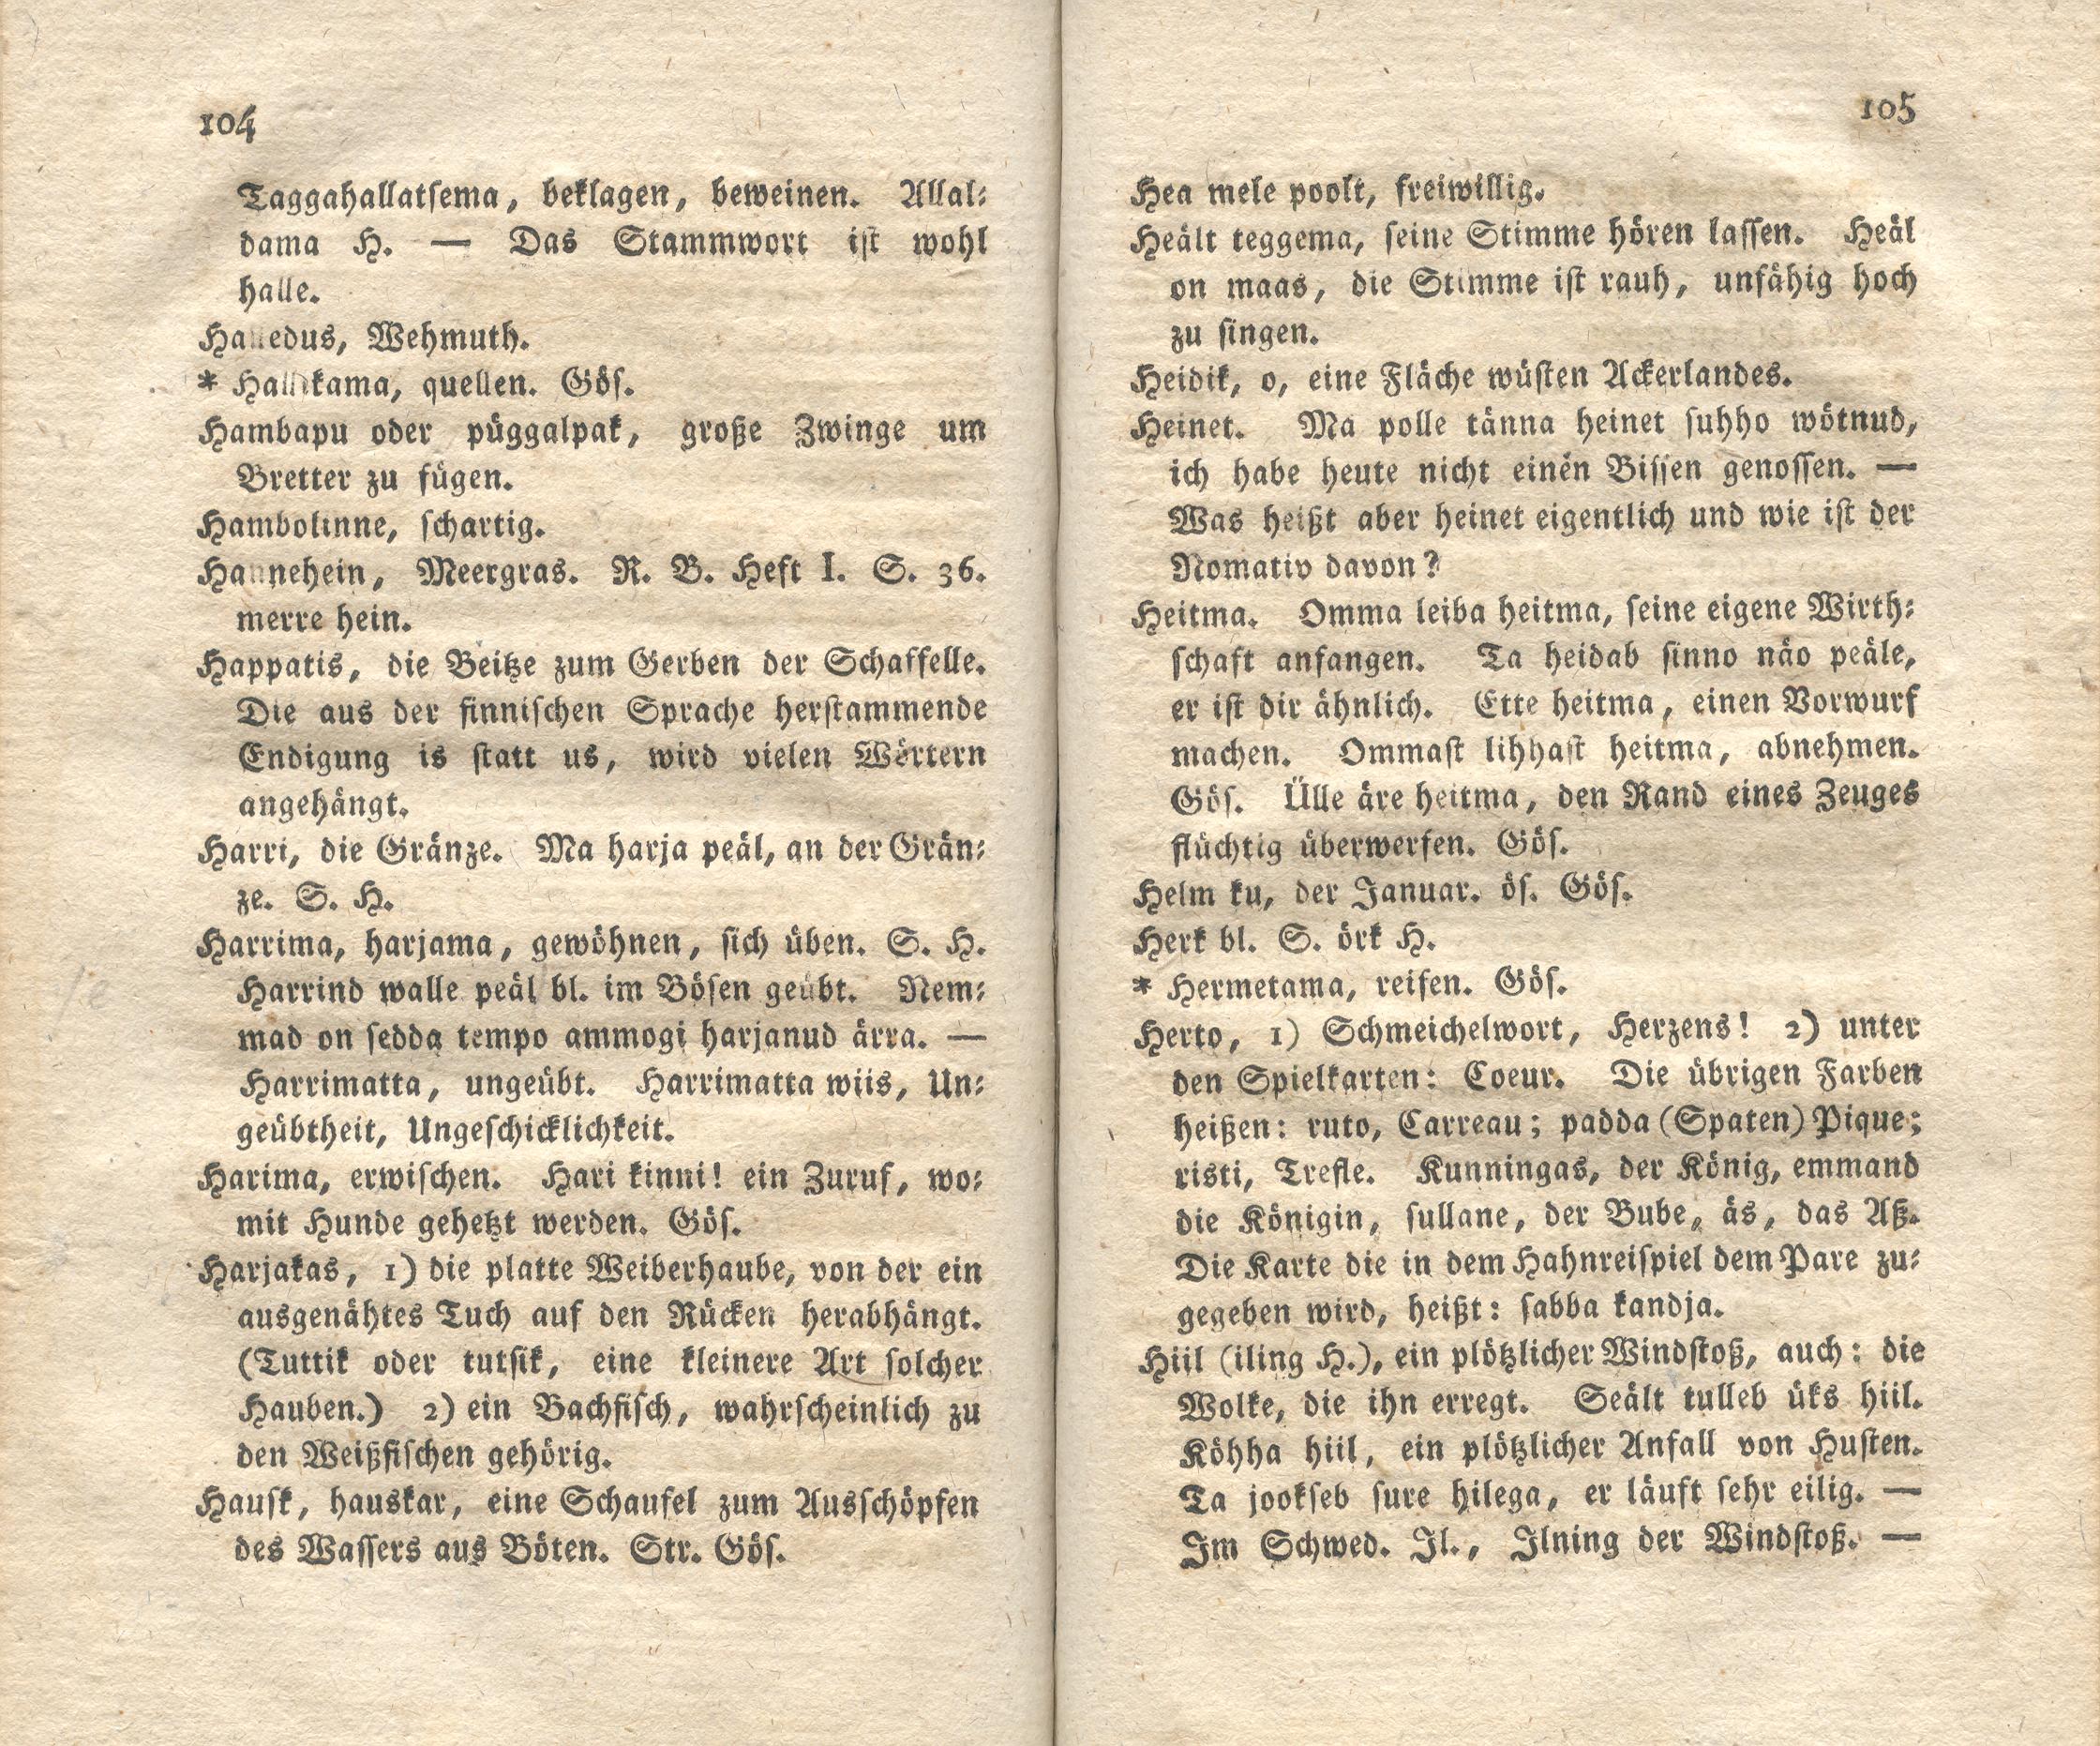 Beiträge [05] (1816) | 54. (104-105) Main body of text